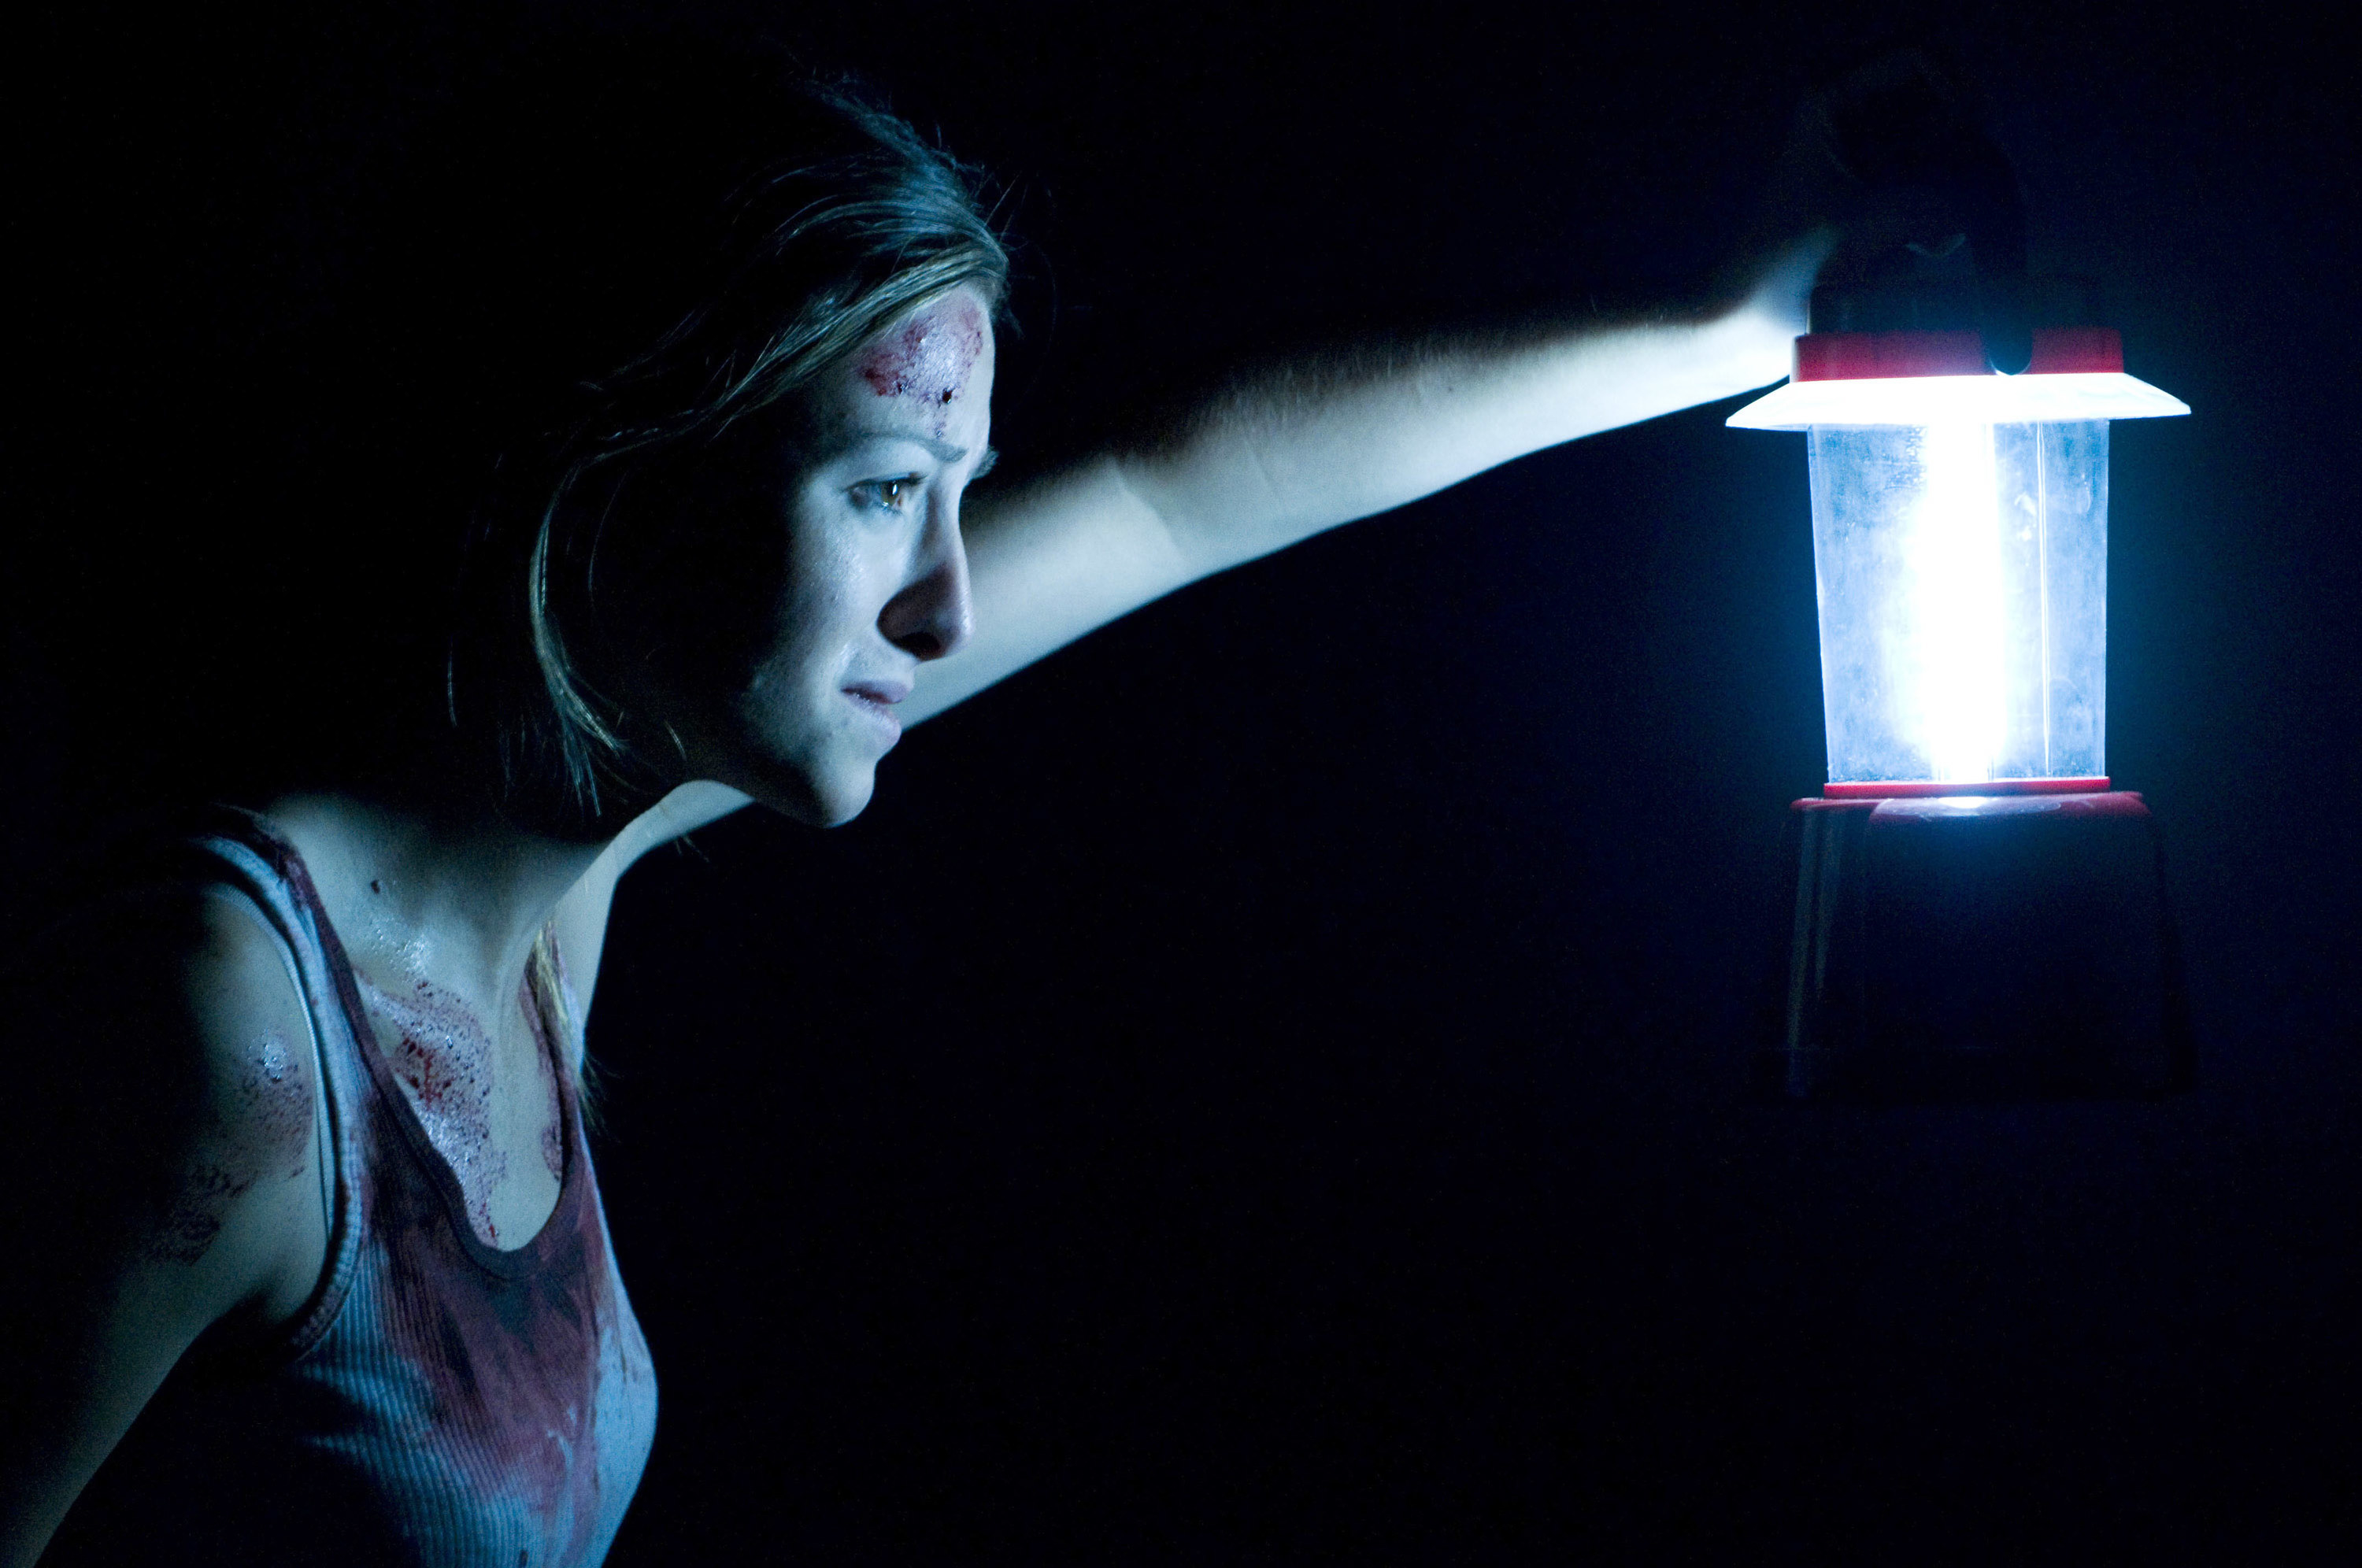 A scared woman, blood on her shirt and face, holding up a lantern in a pitch black room